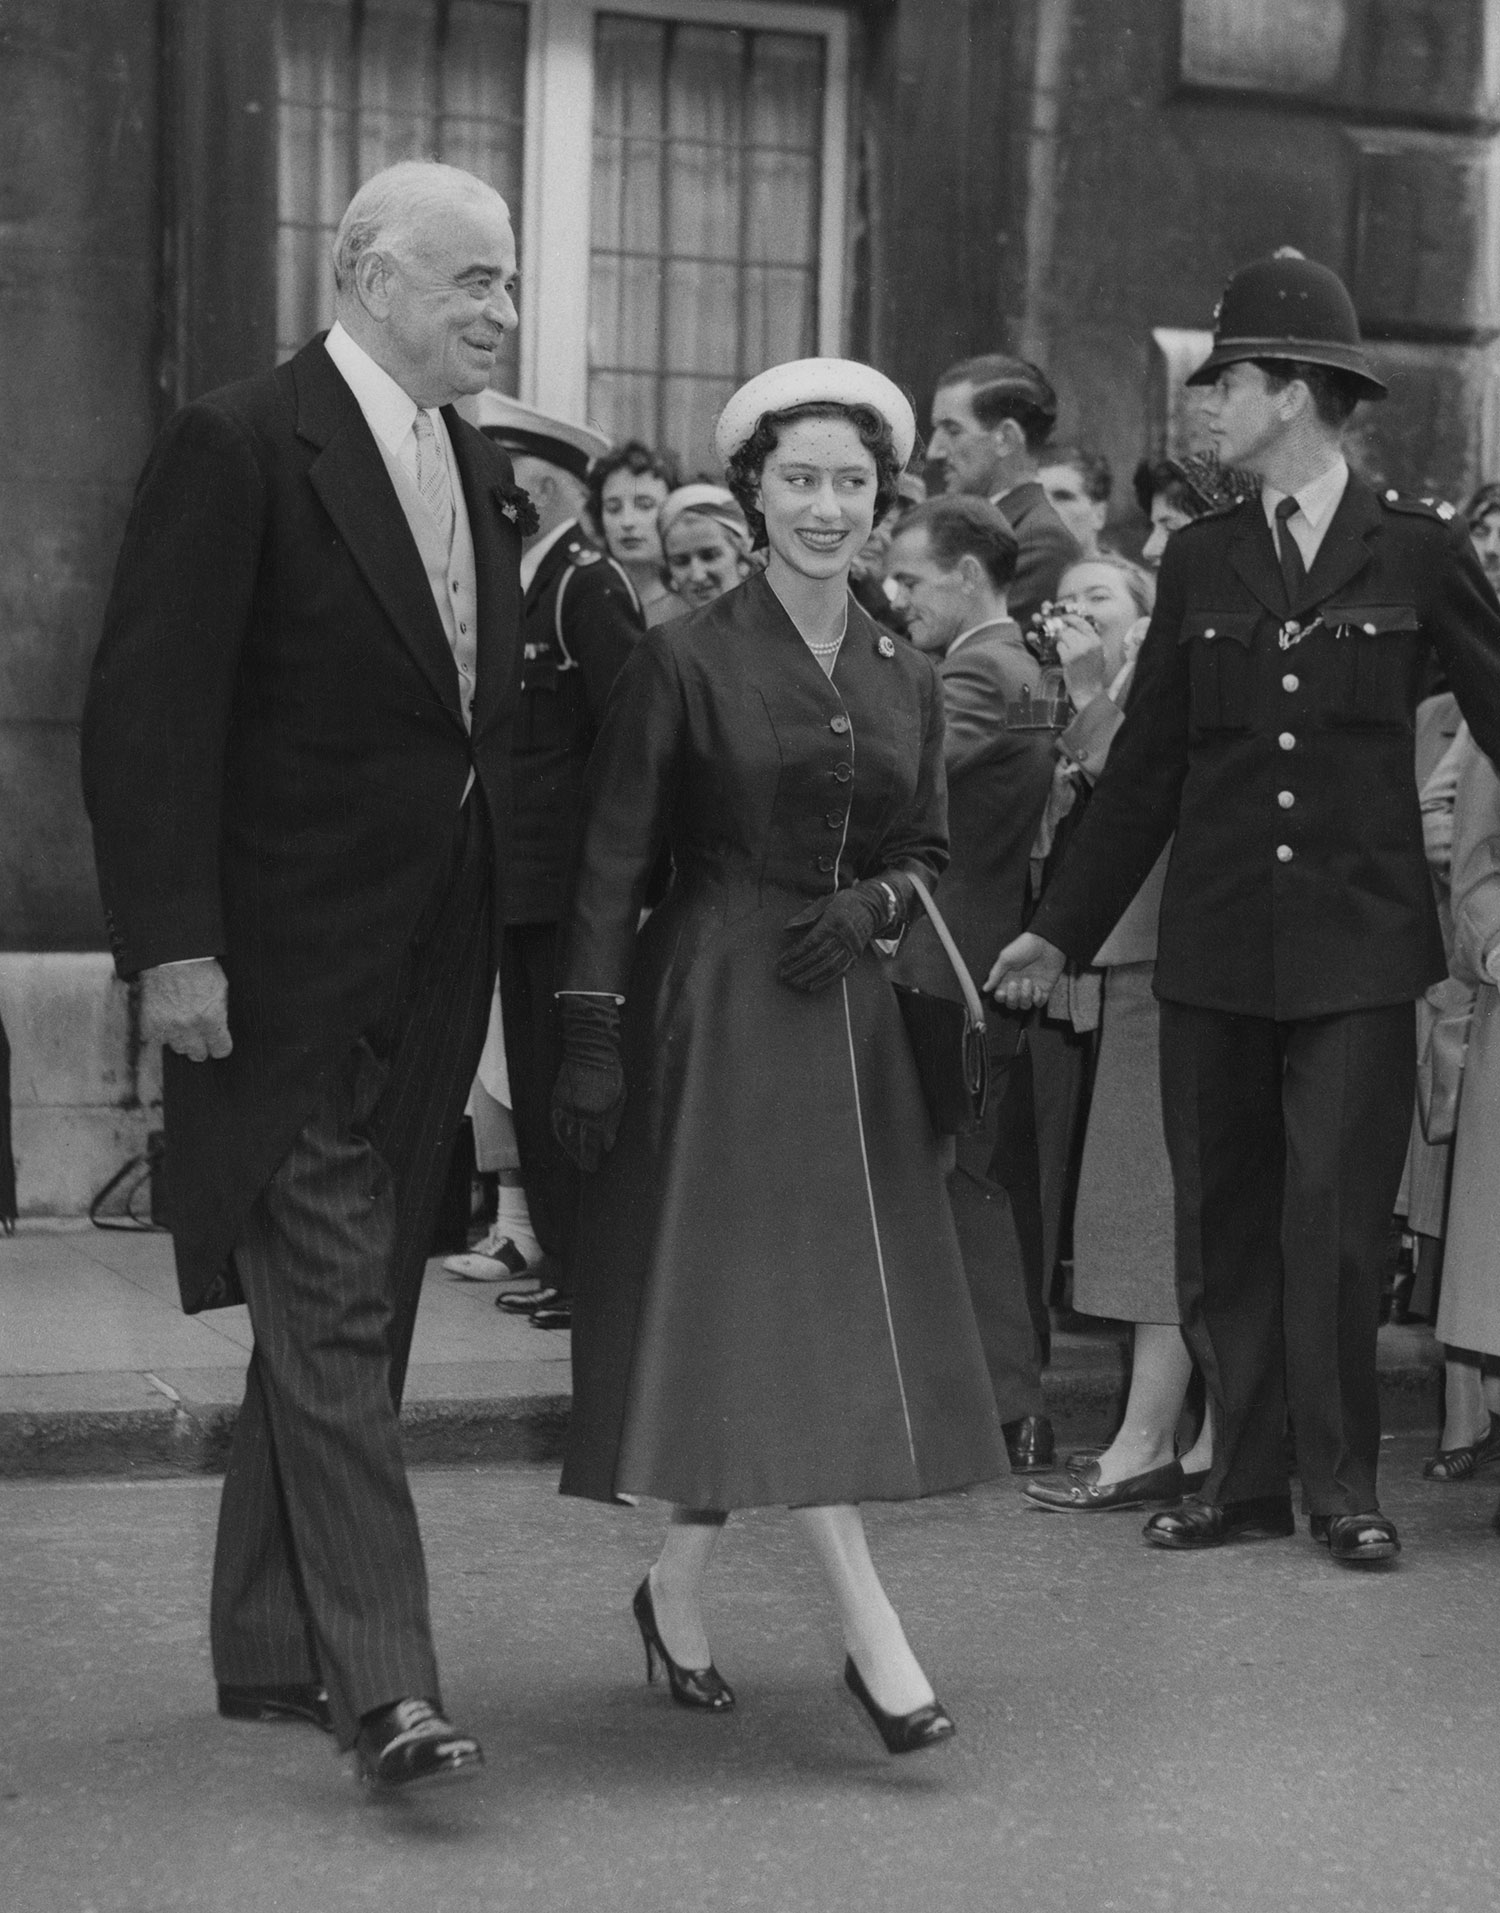 Princess Margaret with Lord Hastings Ismay after the wedding of his daughter, Mary Finnis, to Major Raymond Seymour, in St James', London, September 9, 1957.